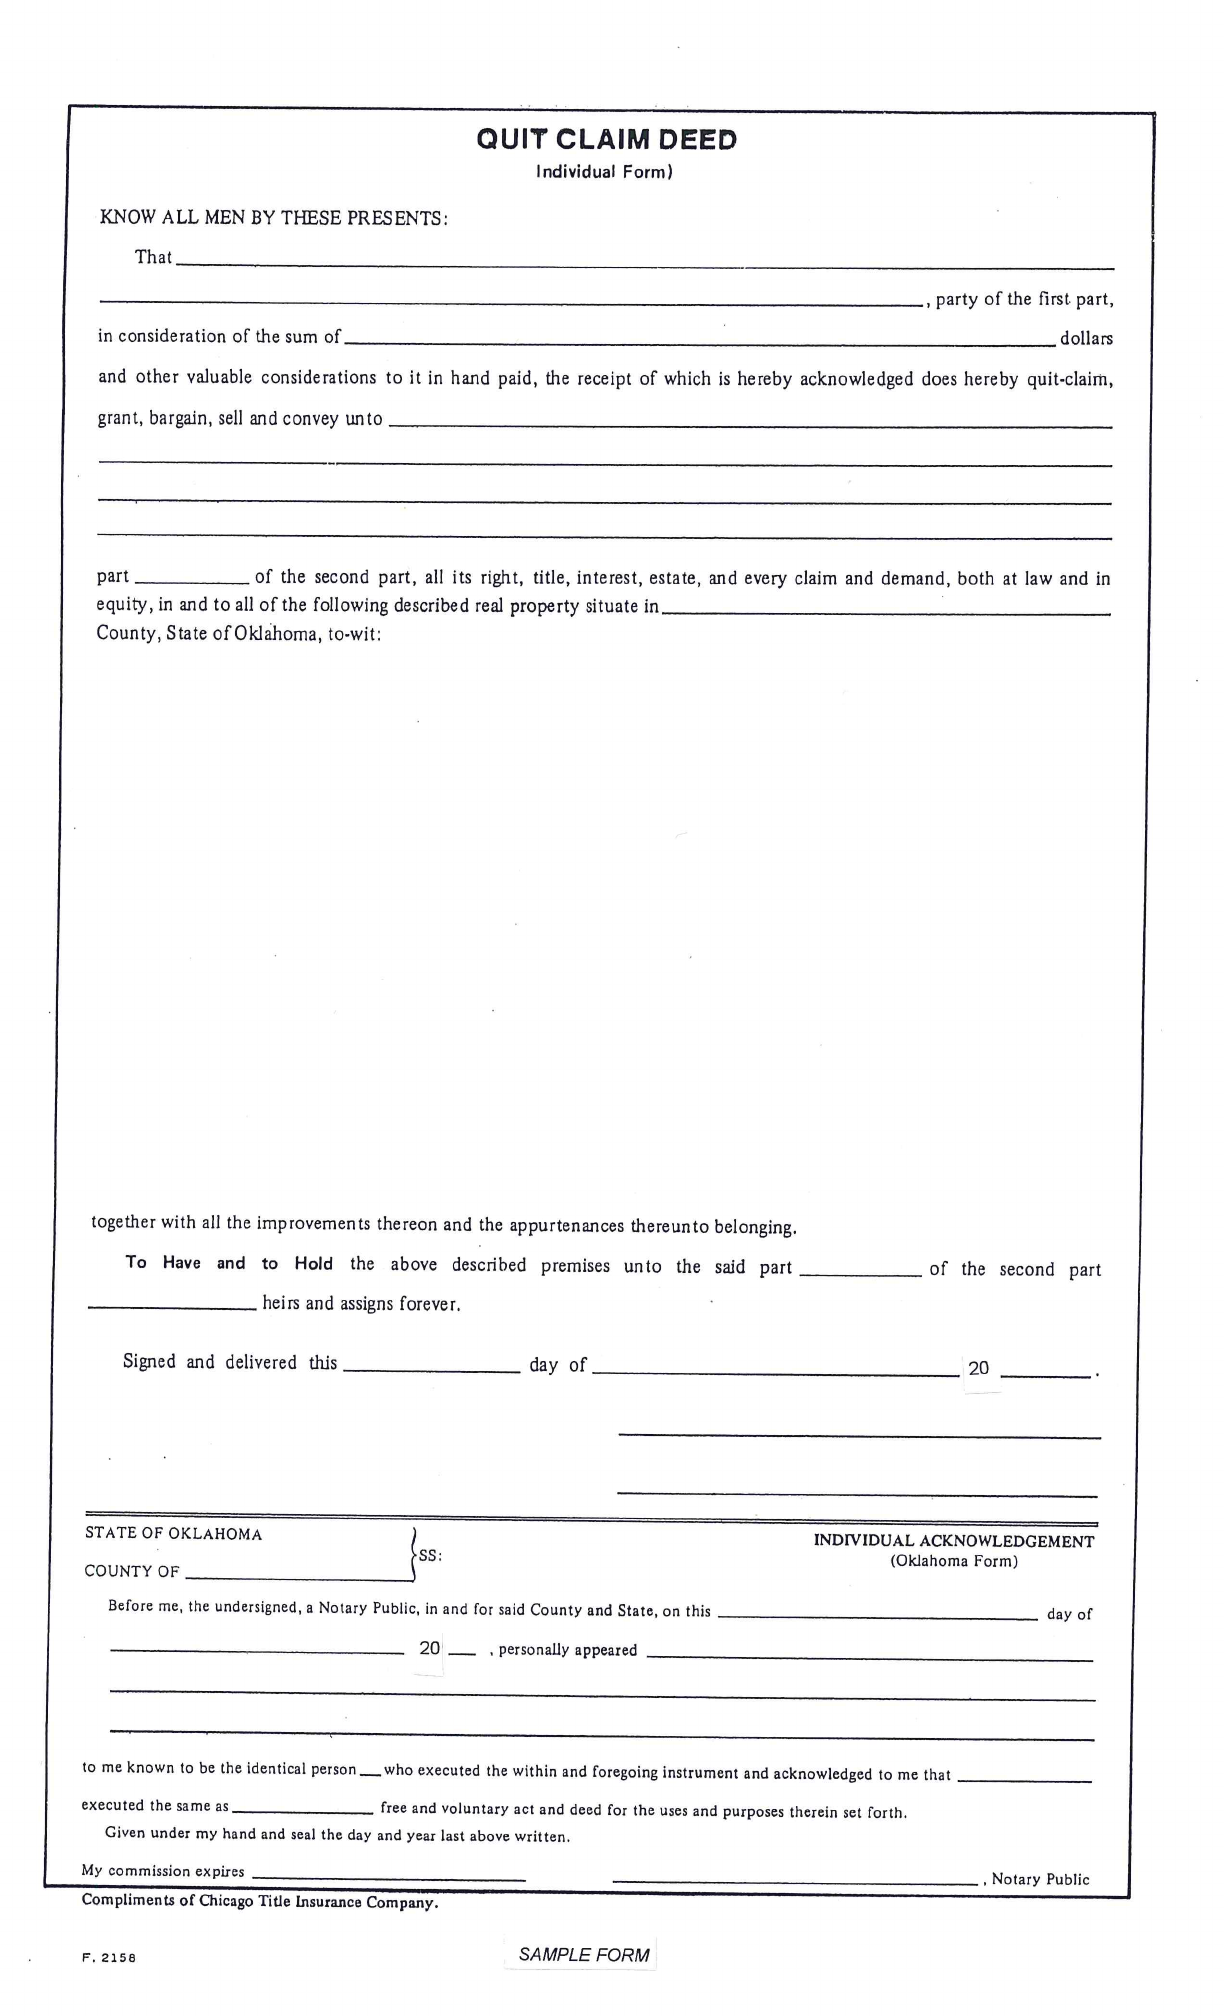 Quit Claim Deed Individual Form Oklahoma Free Download